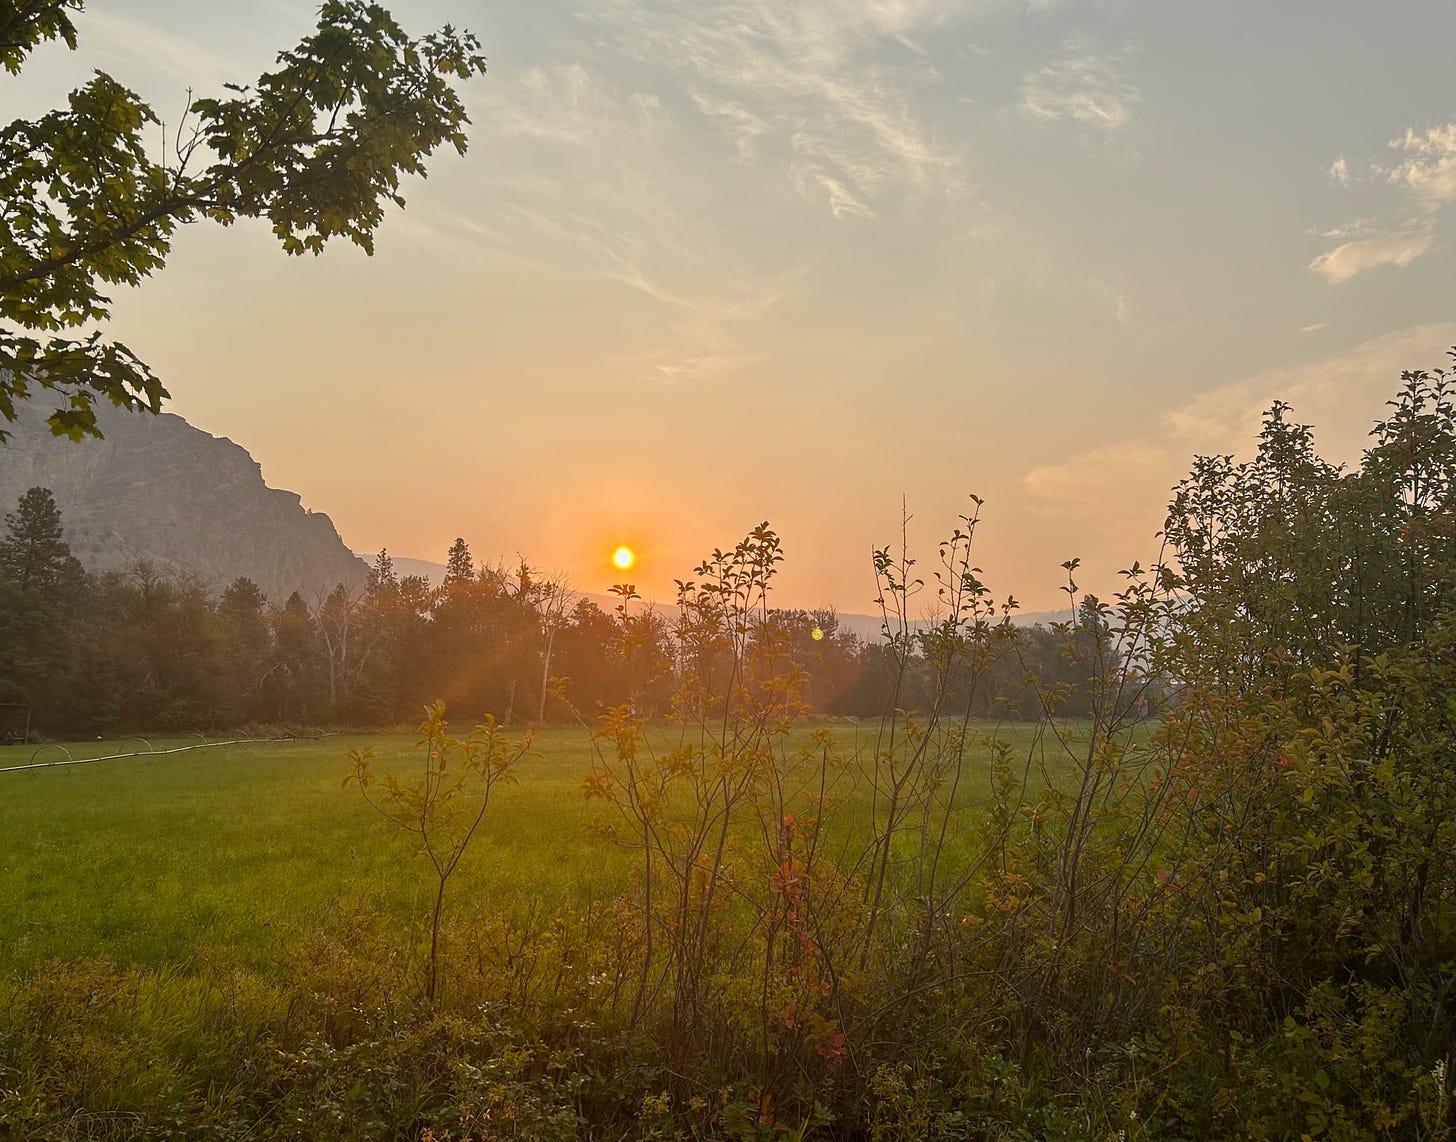 A red sunrise, due to wildfire smoke, over a hayfield on a September morning. There is a bluff in the back left of the photo, and a row of trees at the rear. In the foreground, a row of shrubs begins to blush with the season's colours.